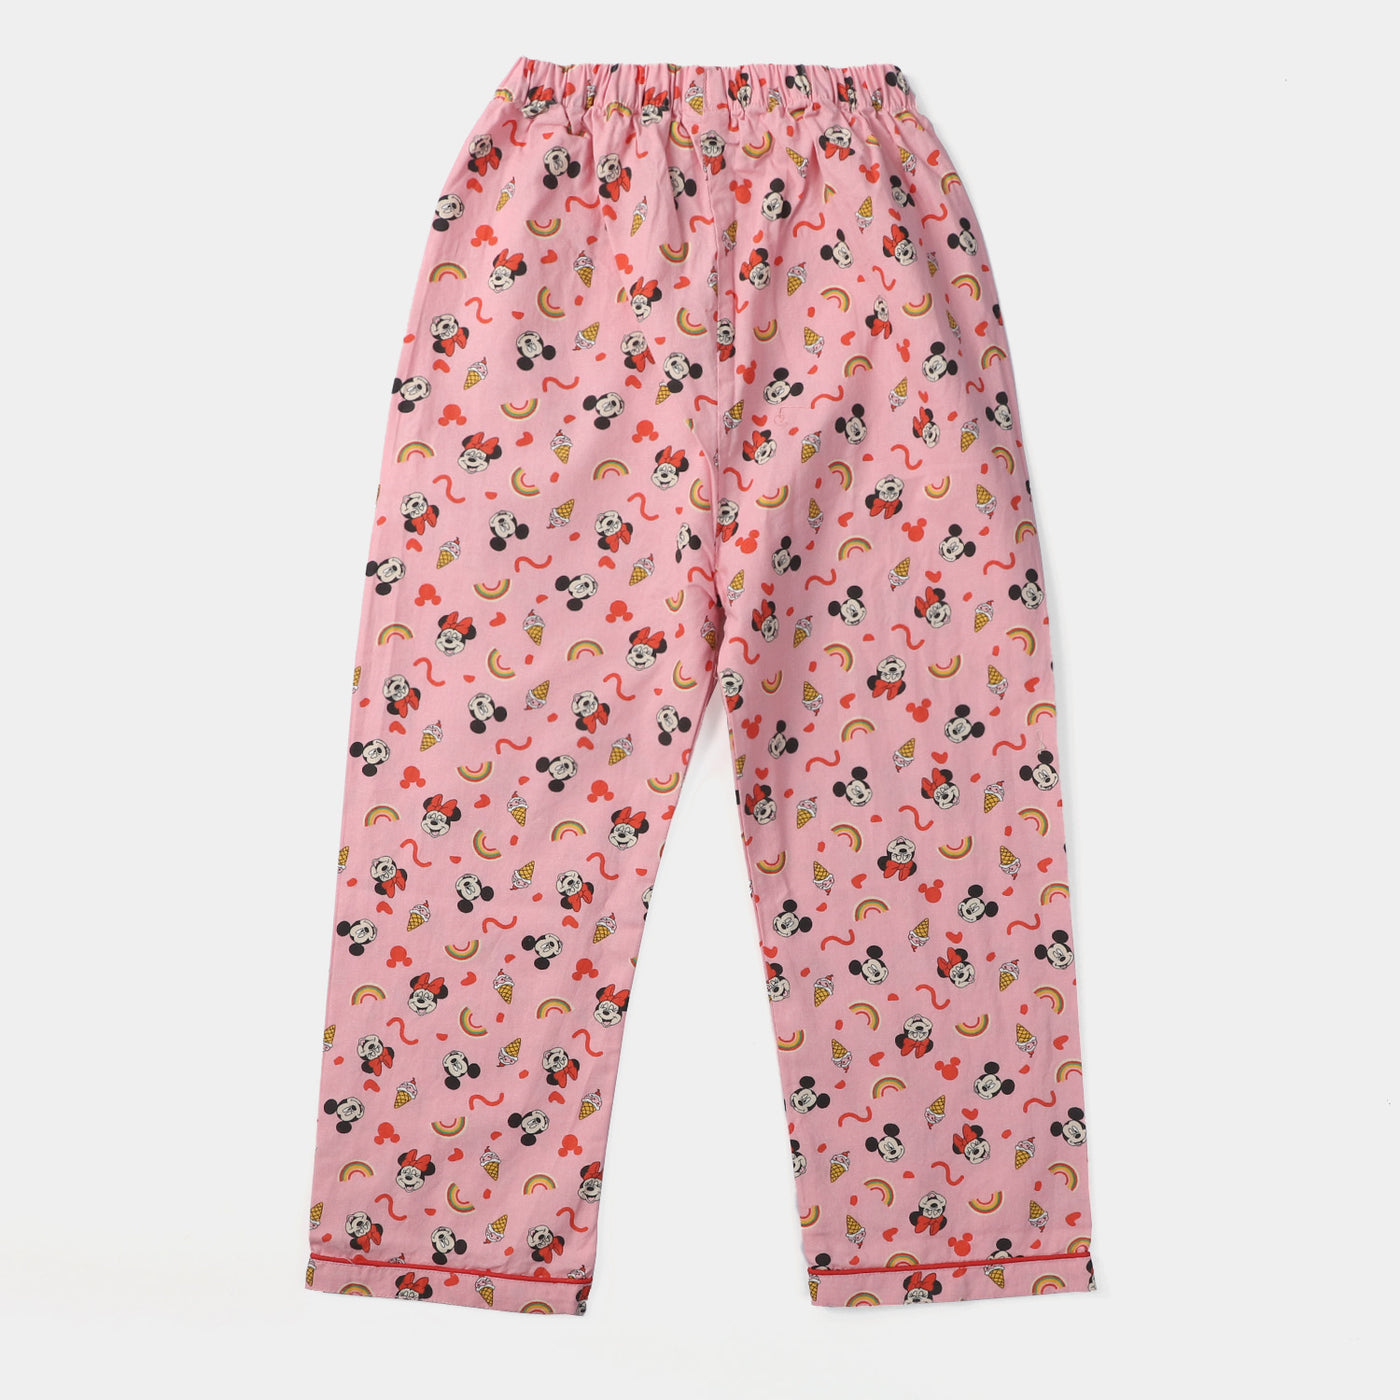 Girls Cotton Woven Night Suit -Pink